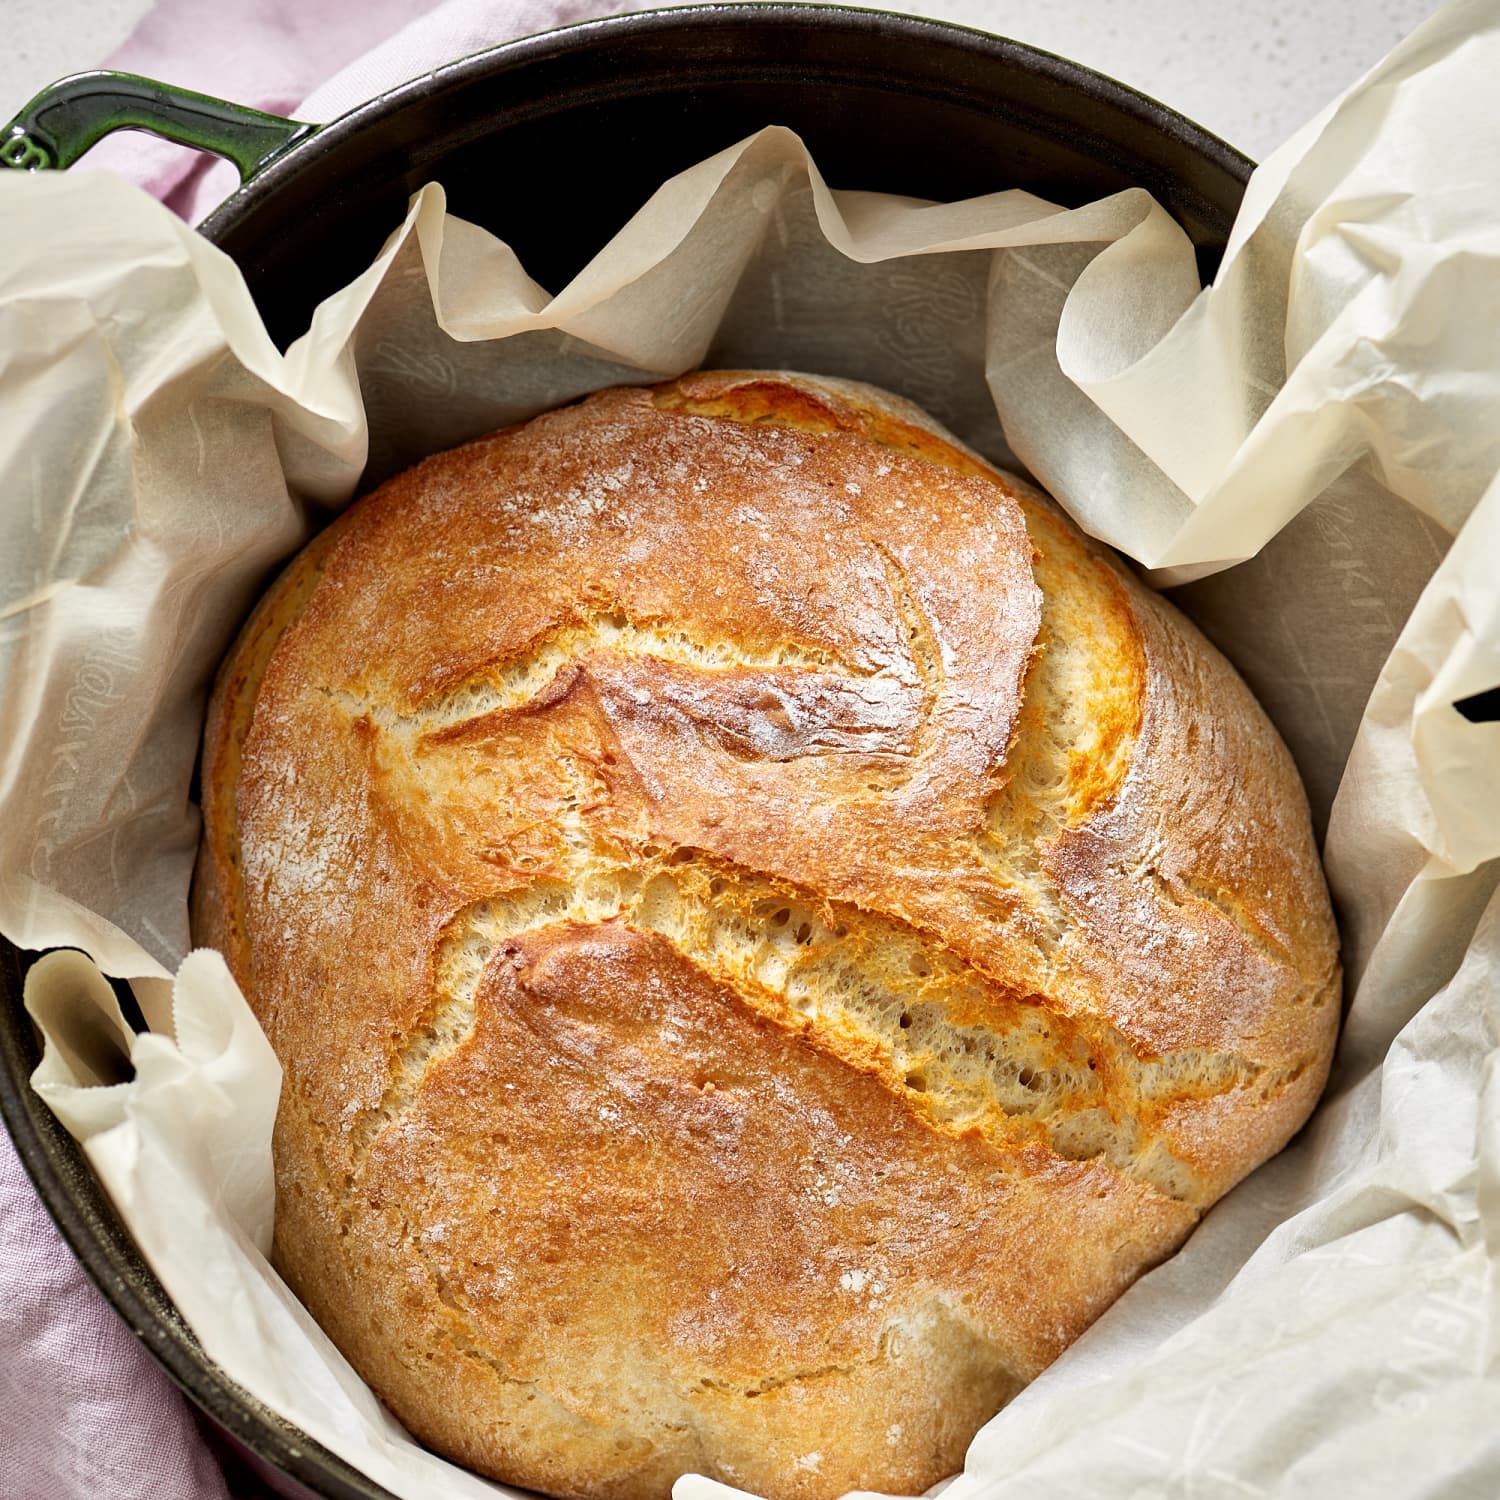 How To Make No-Knead Bread | Kitchn